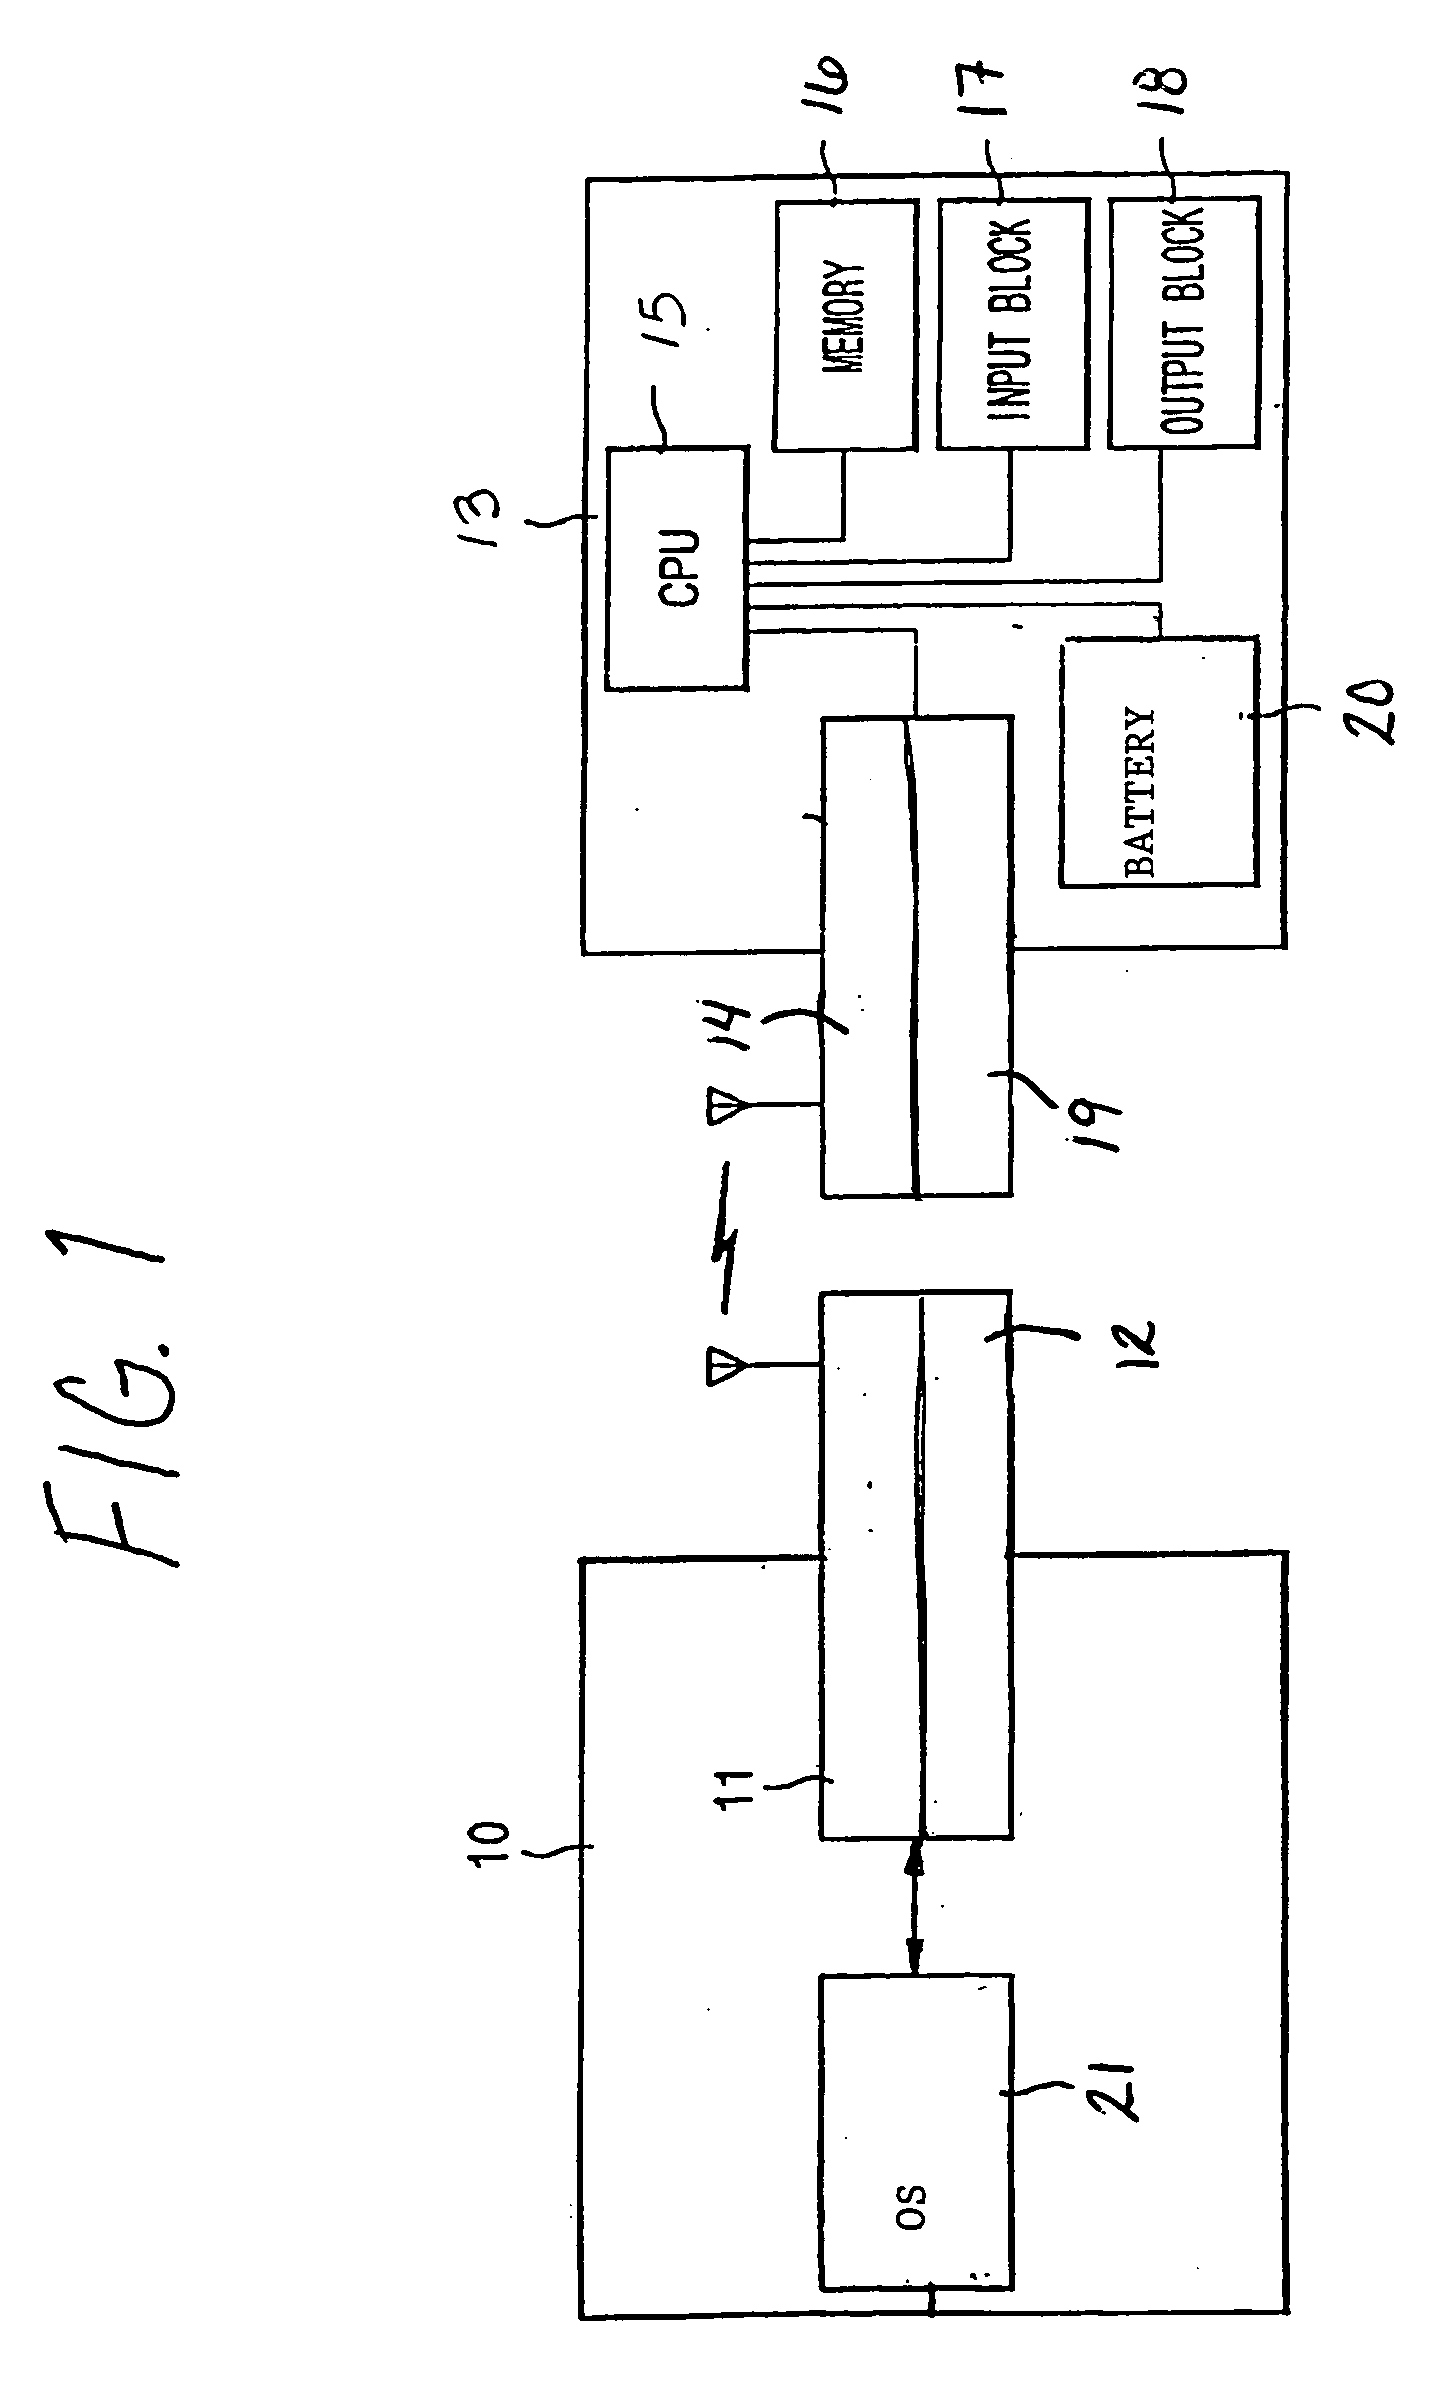 System and method for pairing dual mode wired/wireless devices